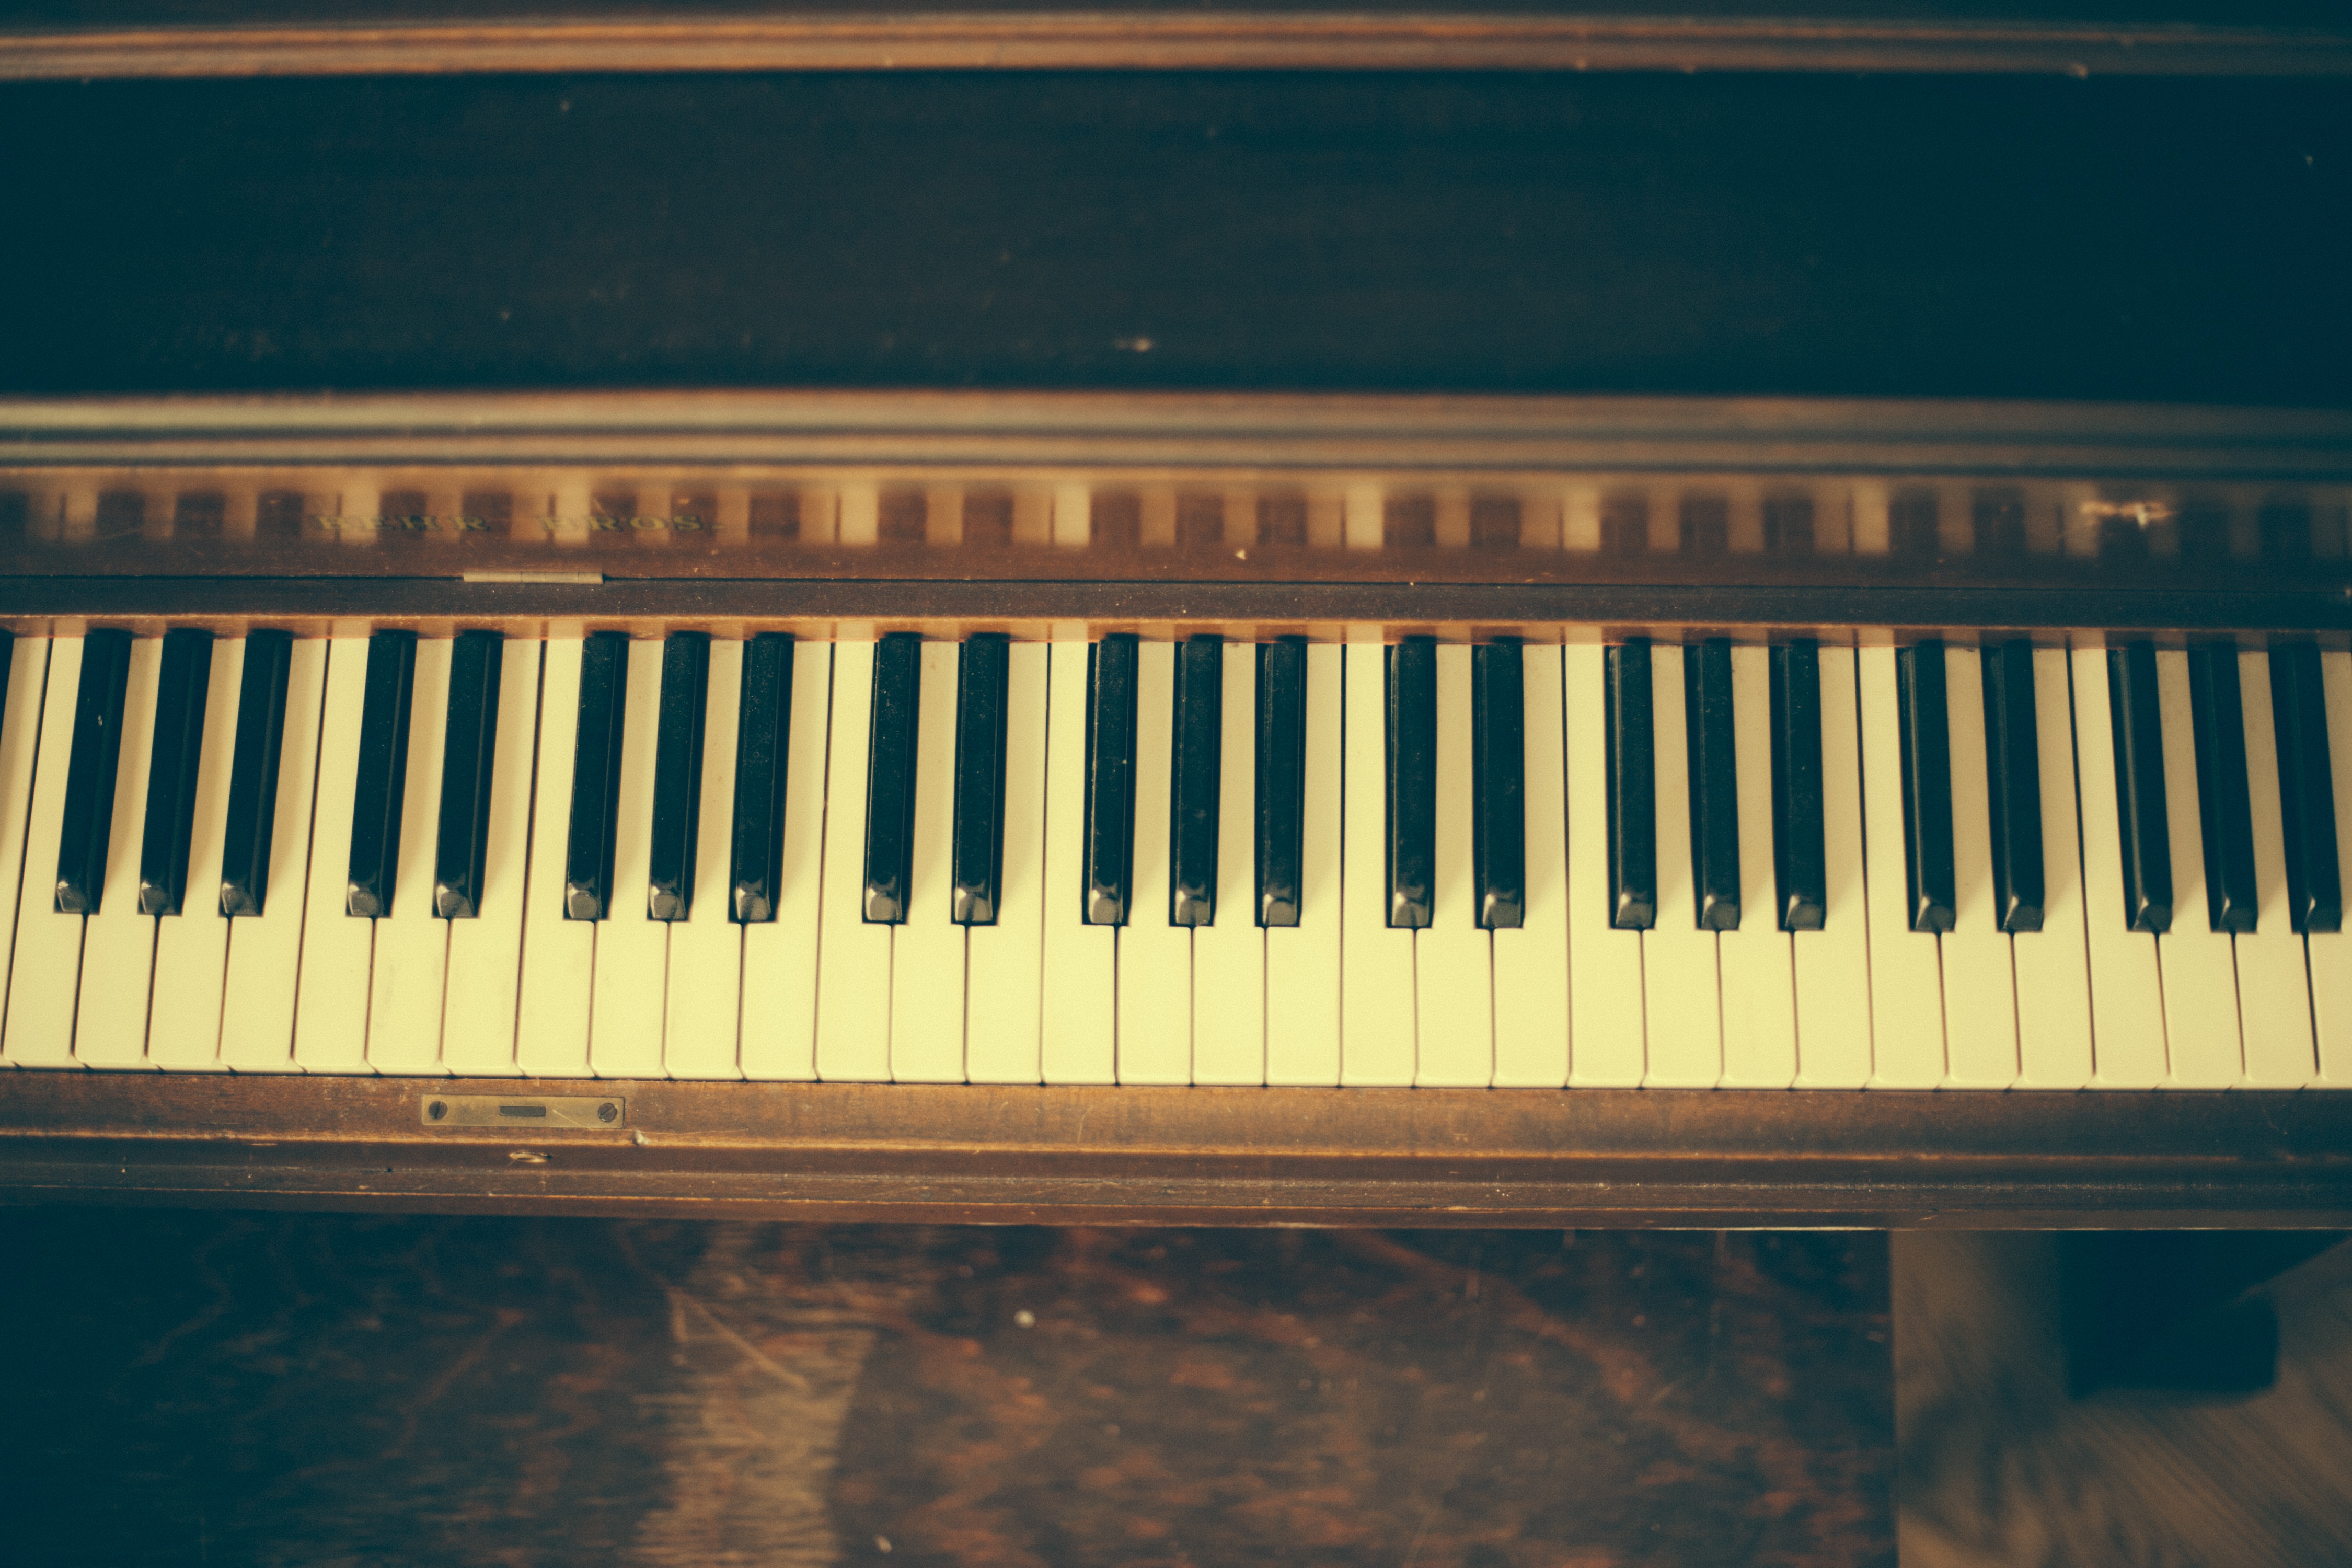 100141 download wallpaper music, piano, musical instrument, keys screensavers and pictures for free